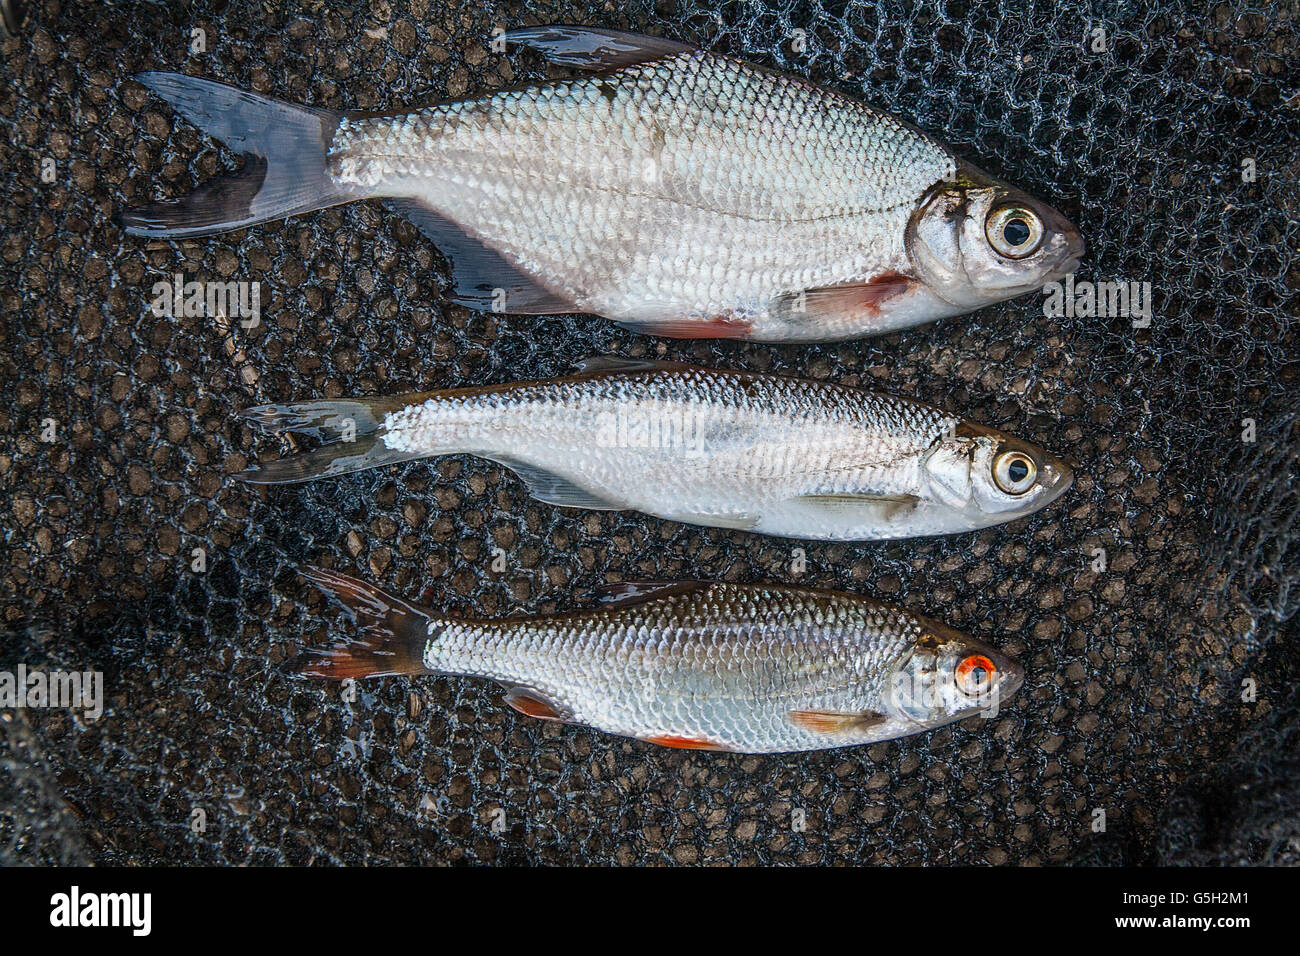 Freshwater fish just taken from the water. Ablet or bleak fish, roach and bream fish on fishing net Stock Photo